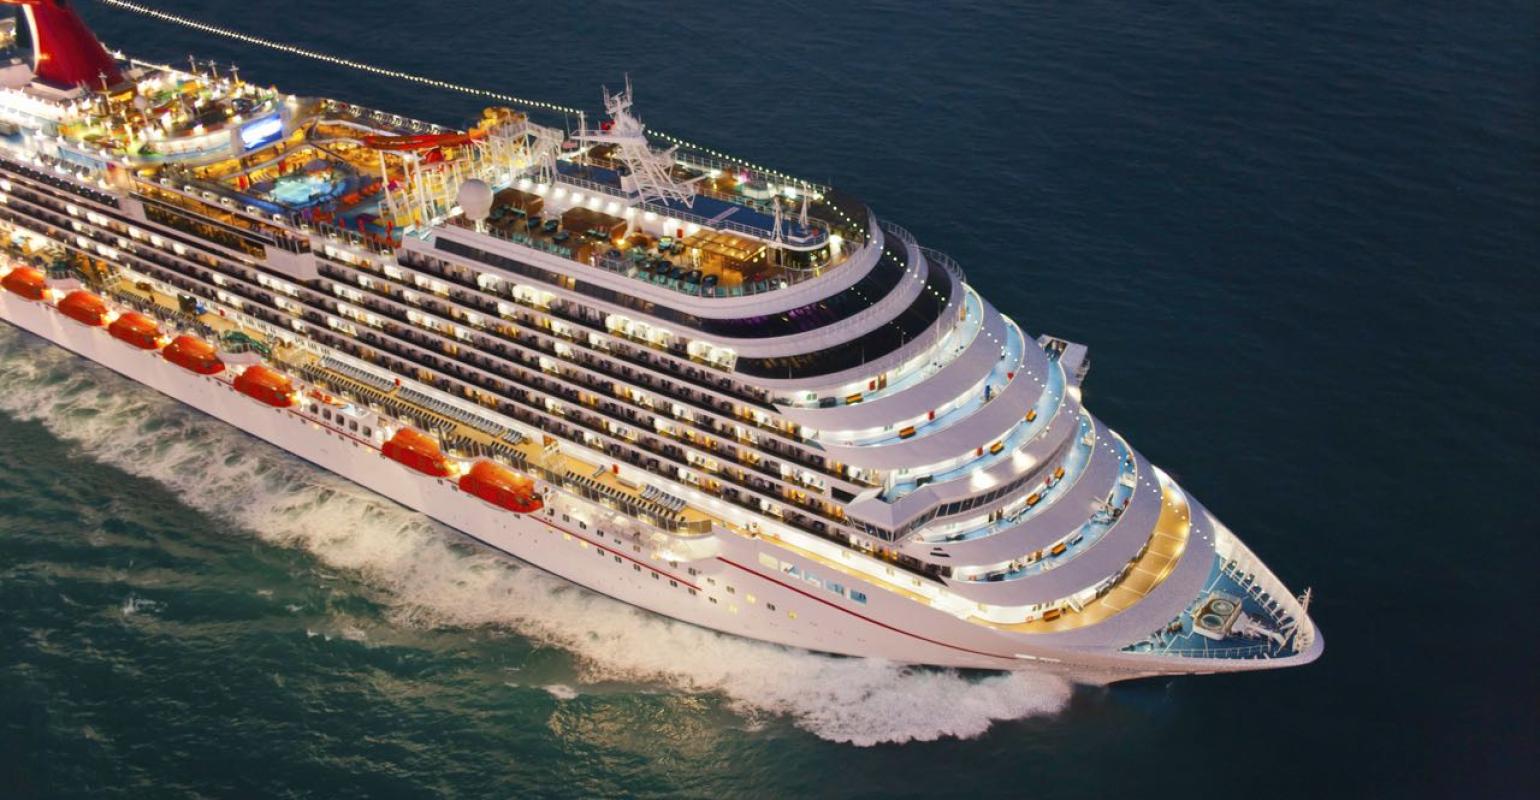 Carnival Magic to sail from Europe, NYC, Canaveral in 2021 seatrade